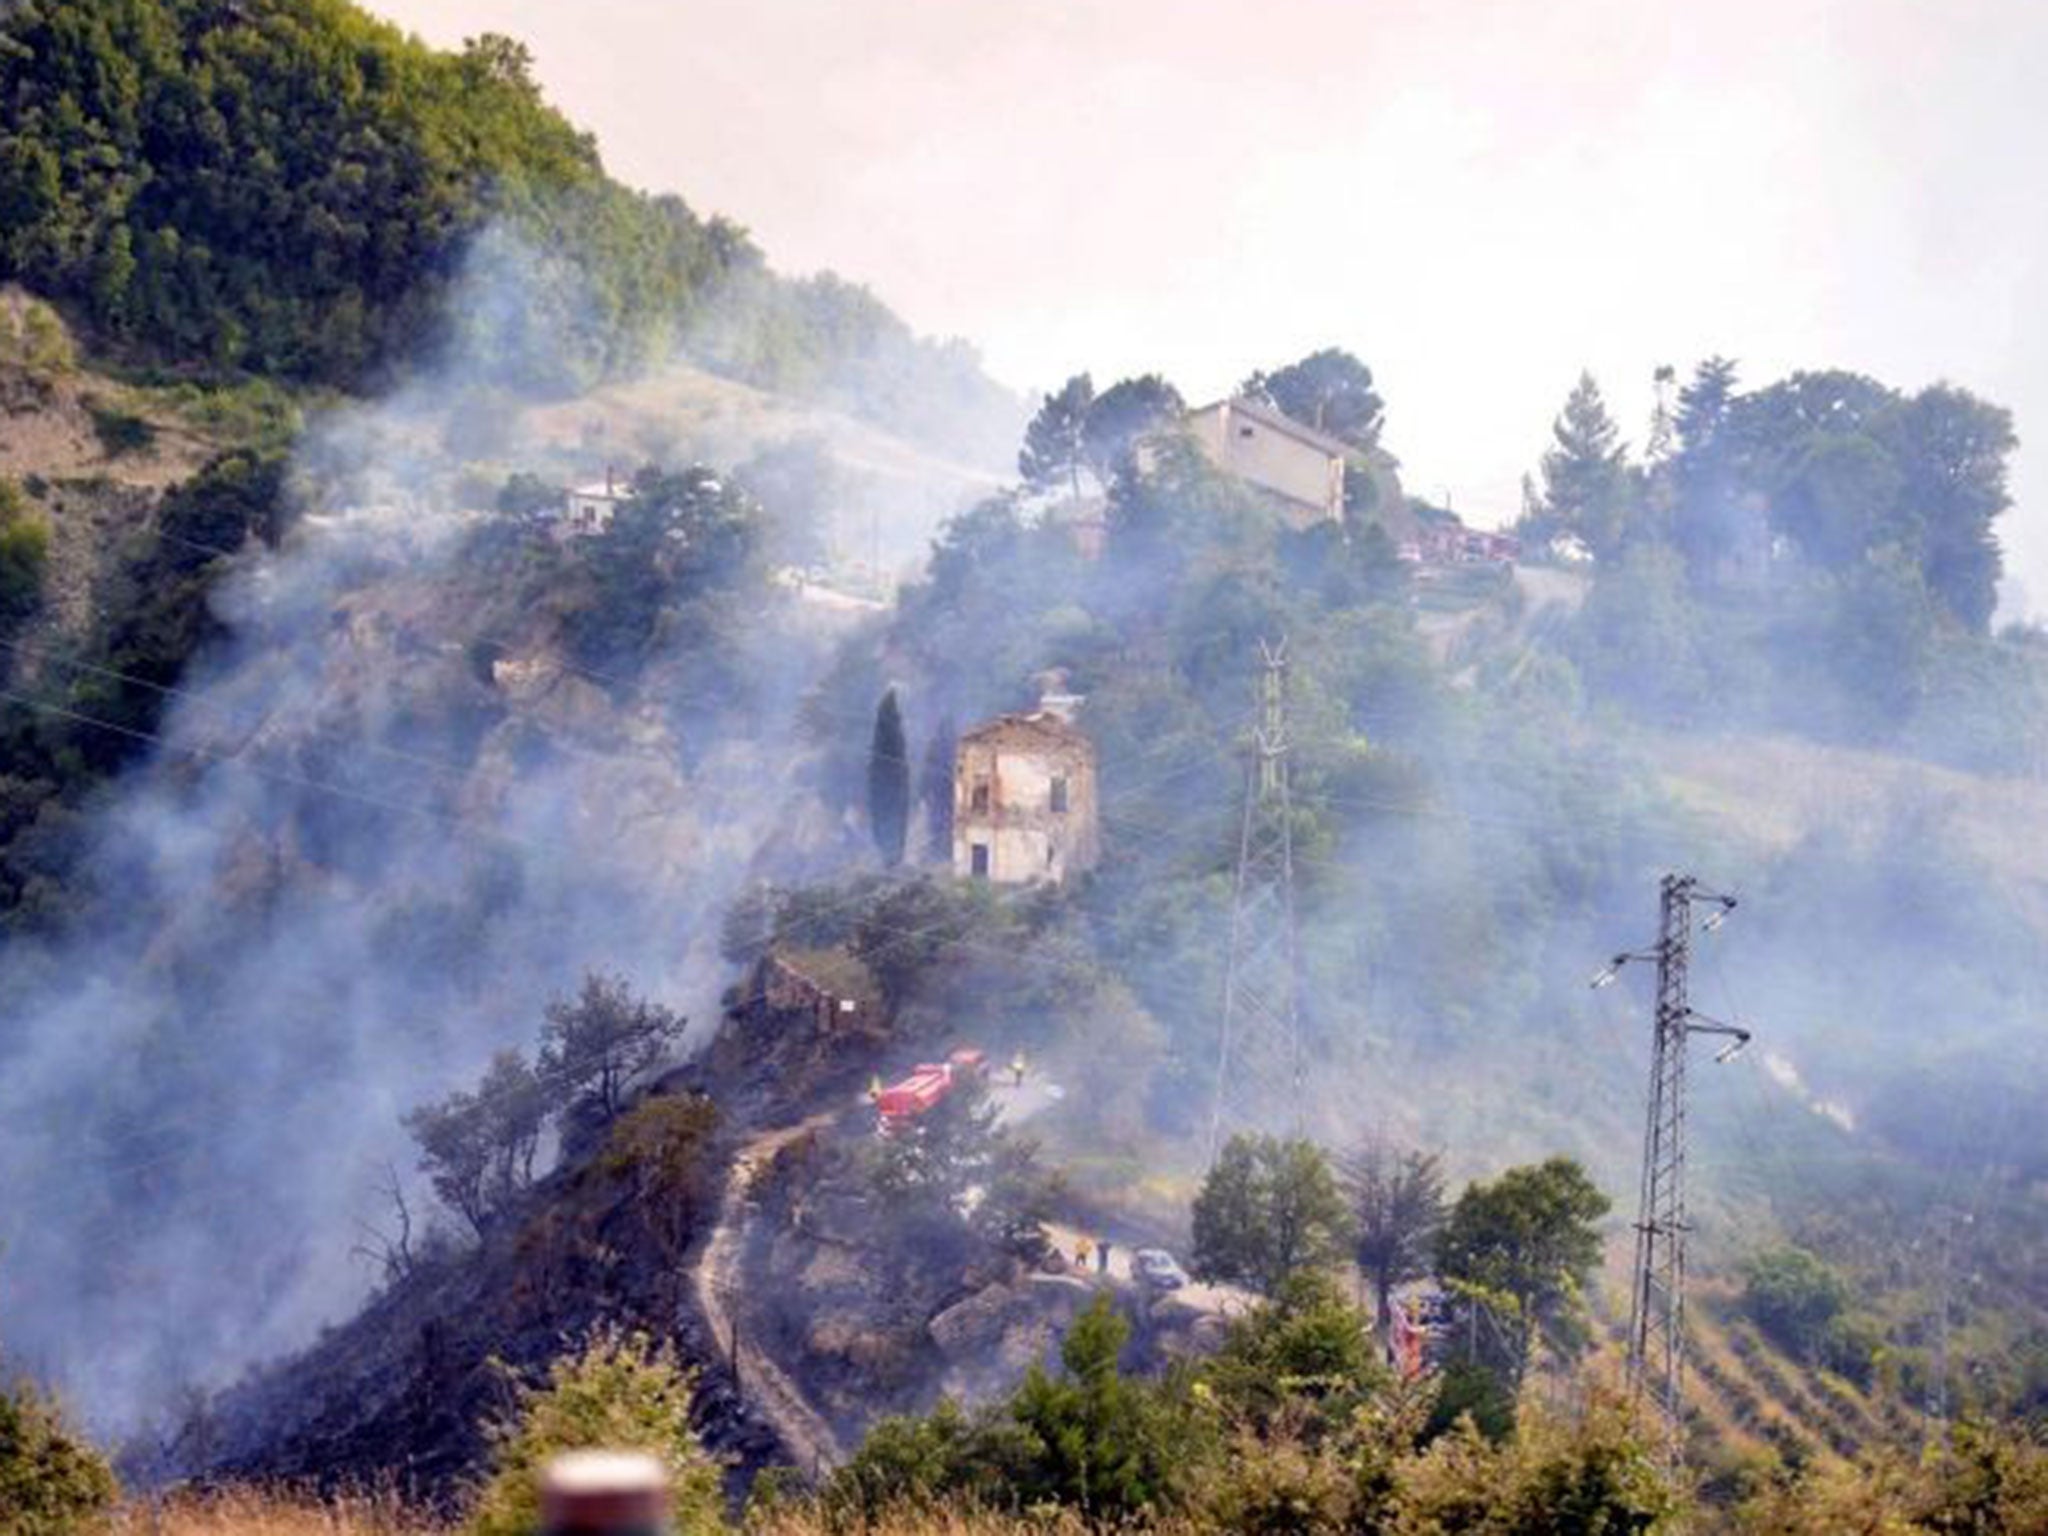 Firefighters at work after the collision of two Italian Air Force jets over the Marche region, Italy, 19 August 2014